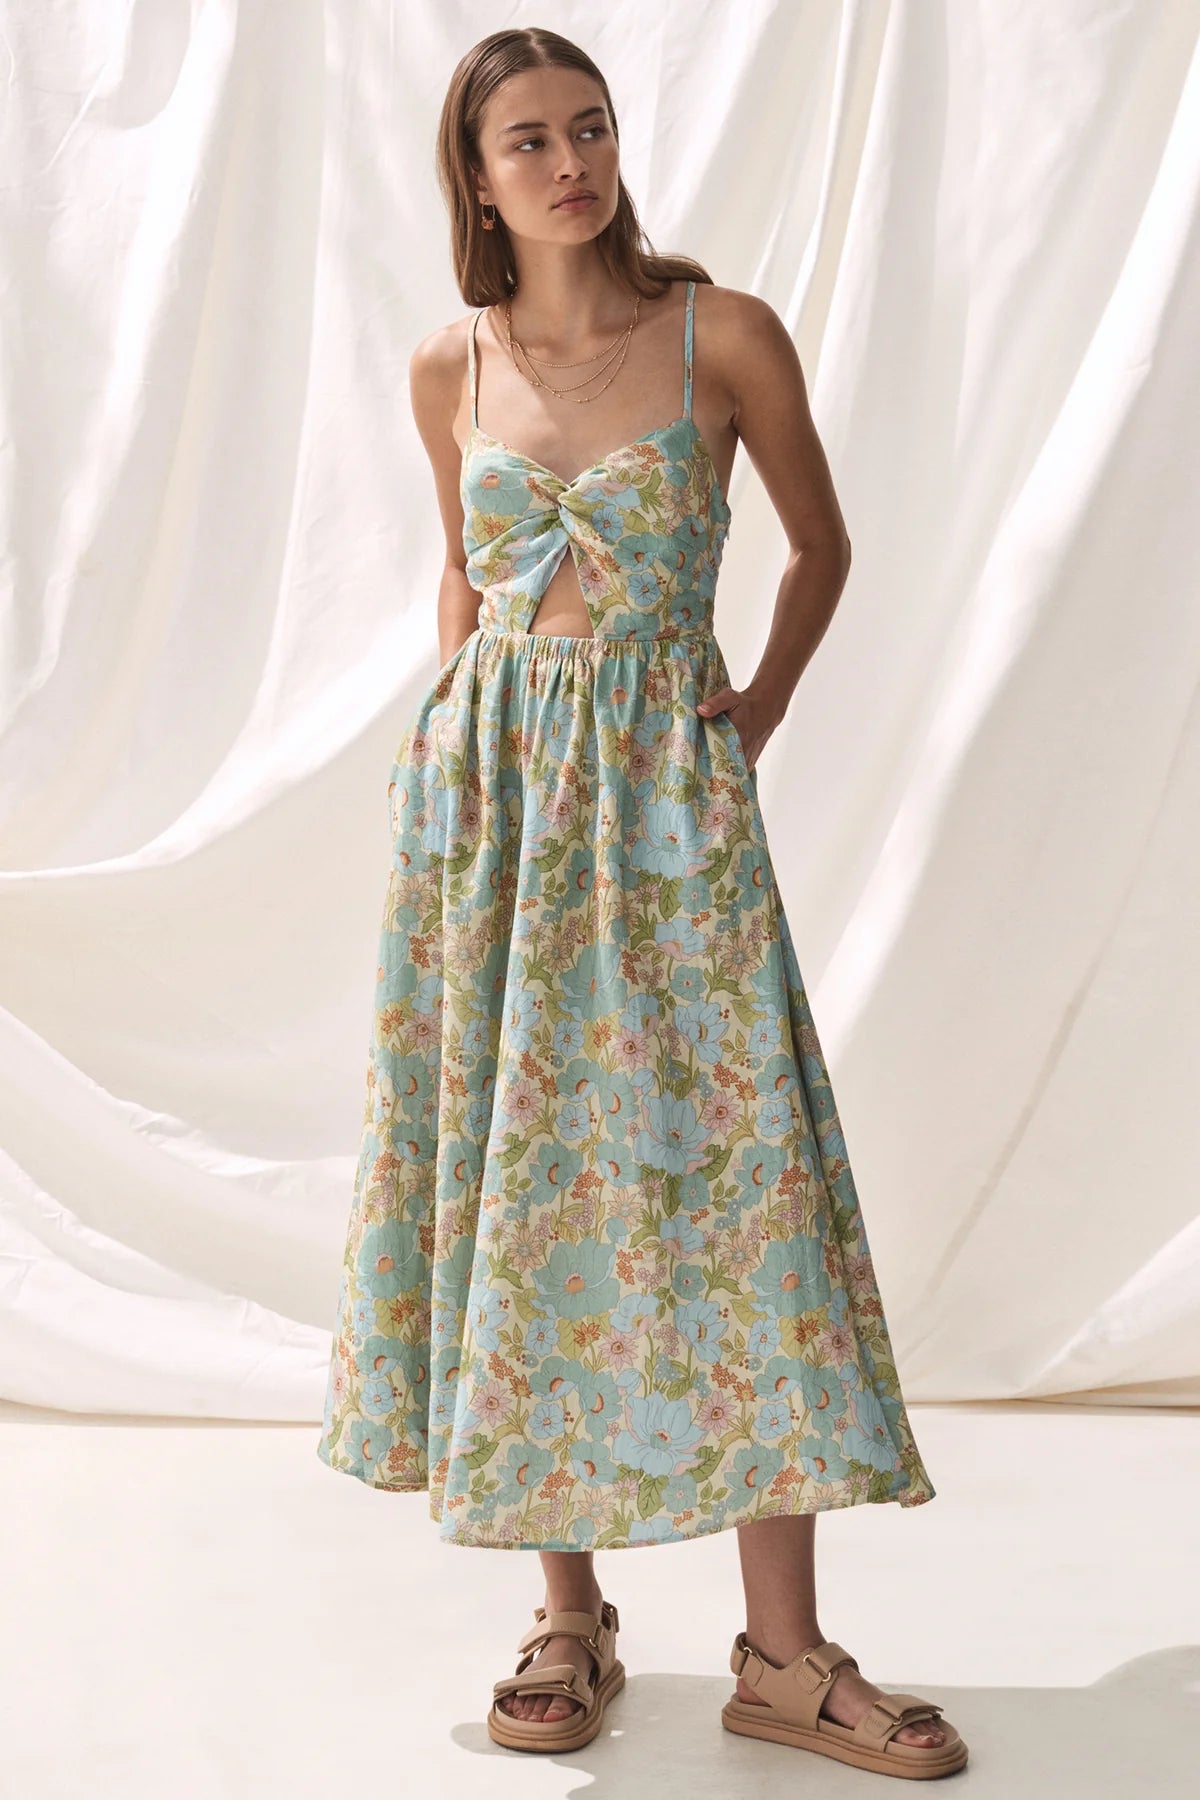 Blue green and floral midi dress with knotted front and peep hole detail and spaghetti straps that tie in a lace detail at the back